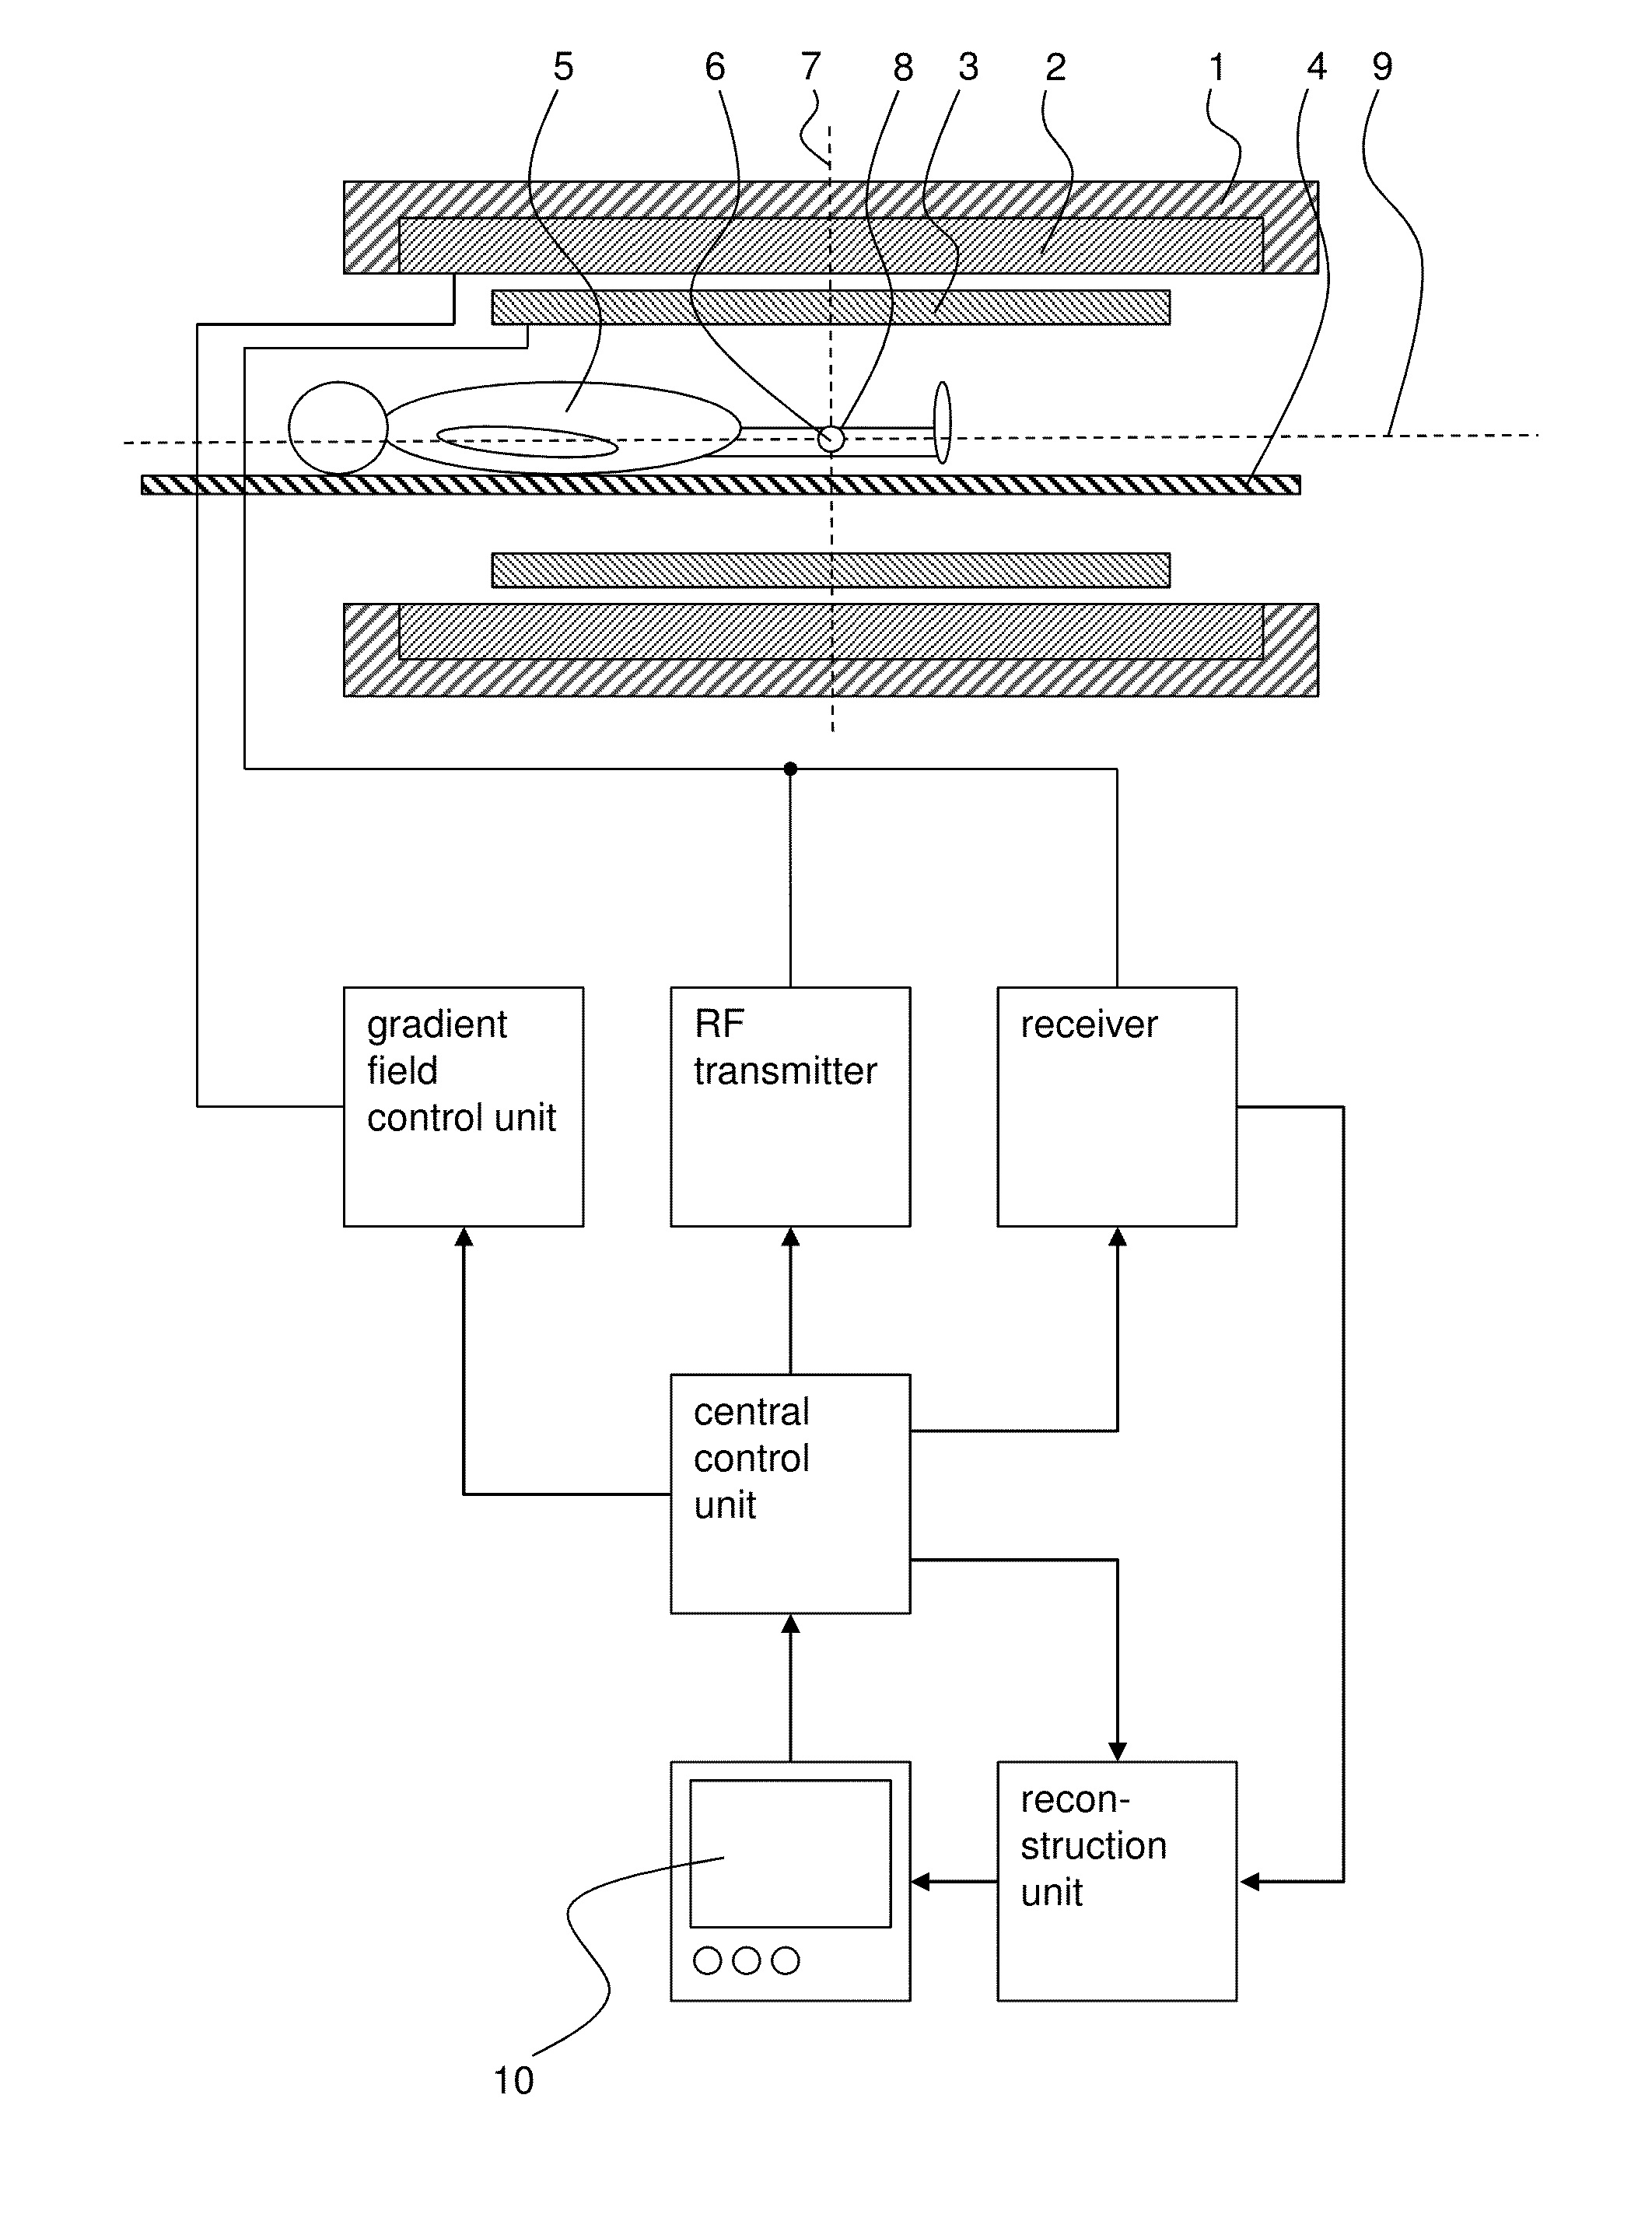 Magnetic resonance imaging method for the quantification of the t1 and/or t2 relaxation times in a sample